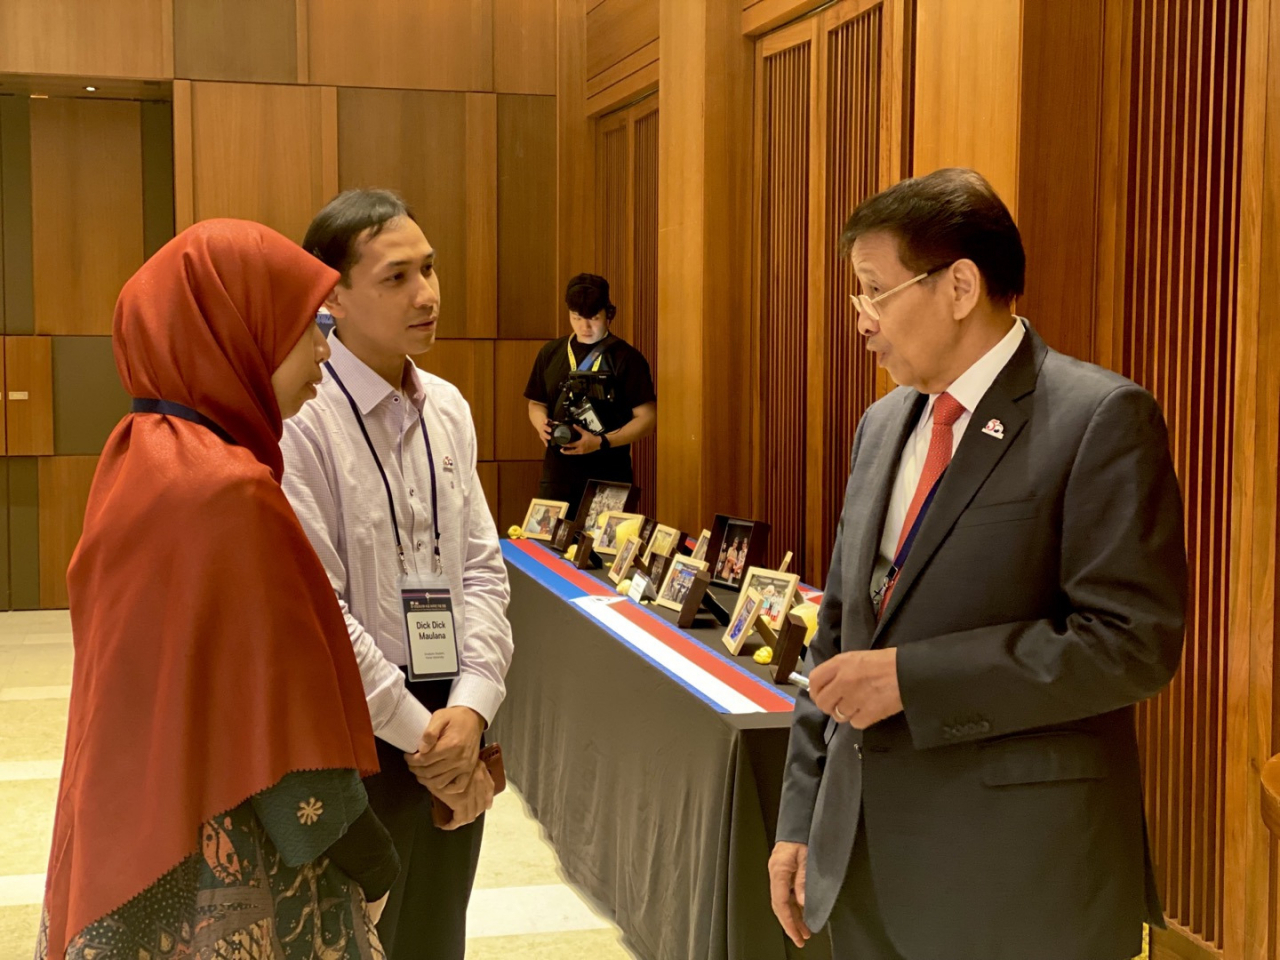 Indonesia’s former foreign minister Hassan Wirajuda interacts with Indonesian nationals at the Indonesia-Korea Forum commemorating 5o years of diplomatic relations at Shilla Seoul on Monday. (Sanjay Kumar/The Korea Herald)